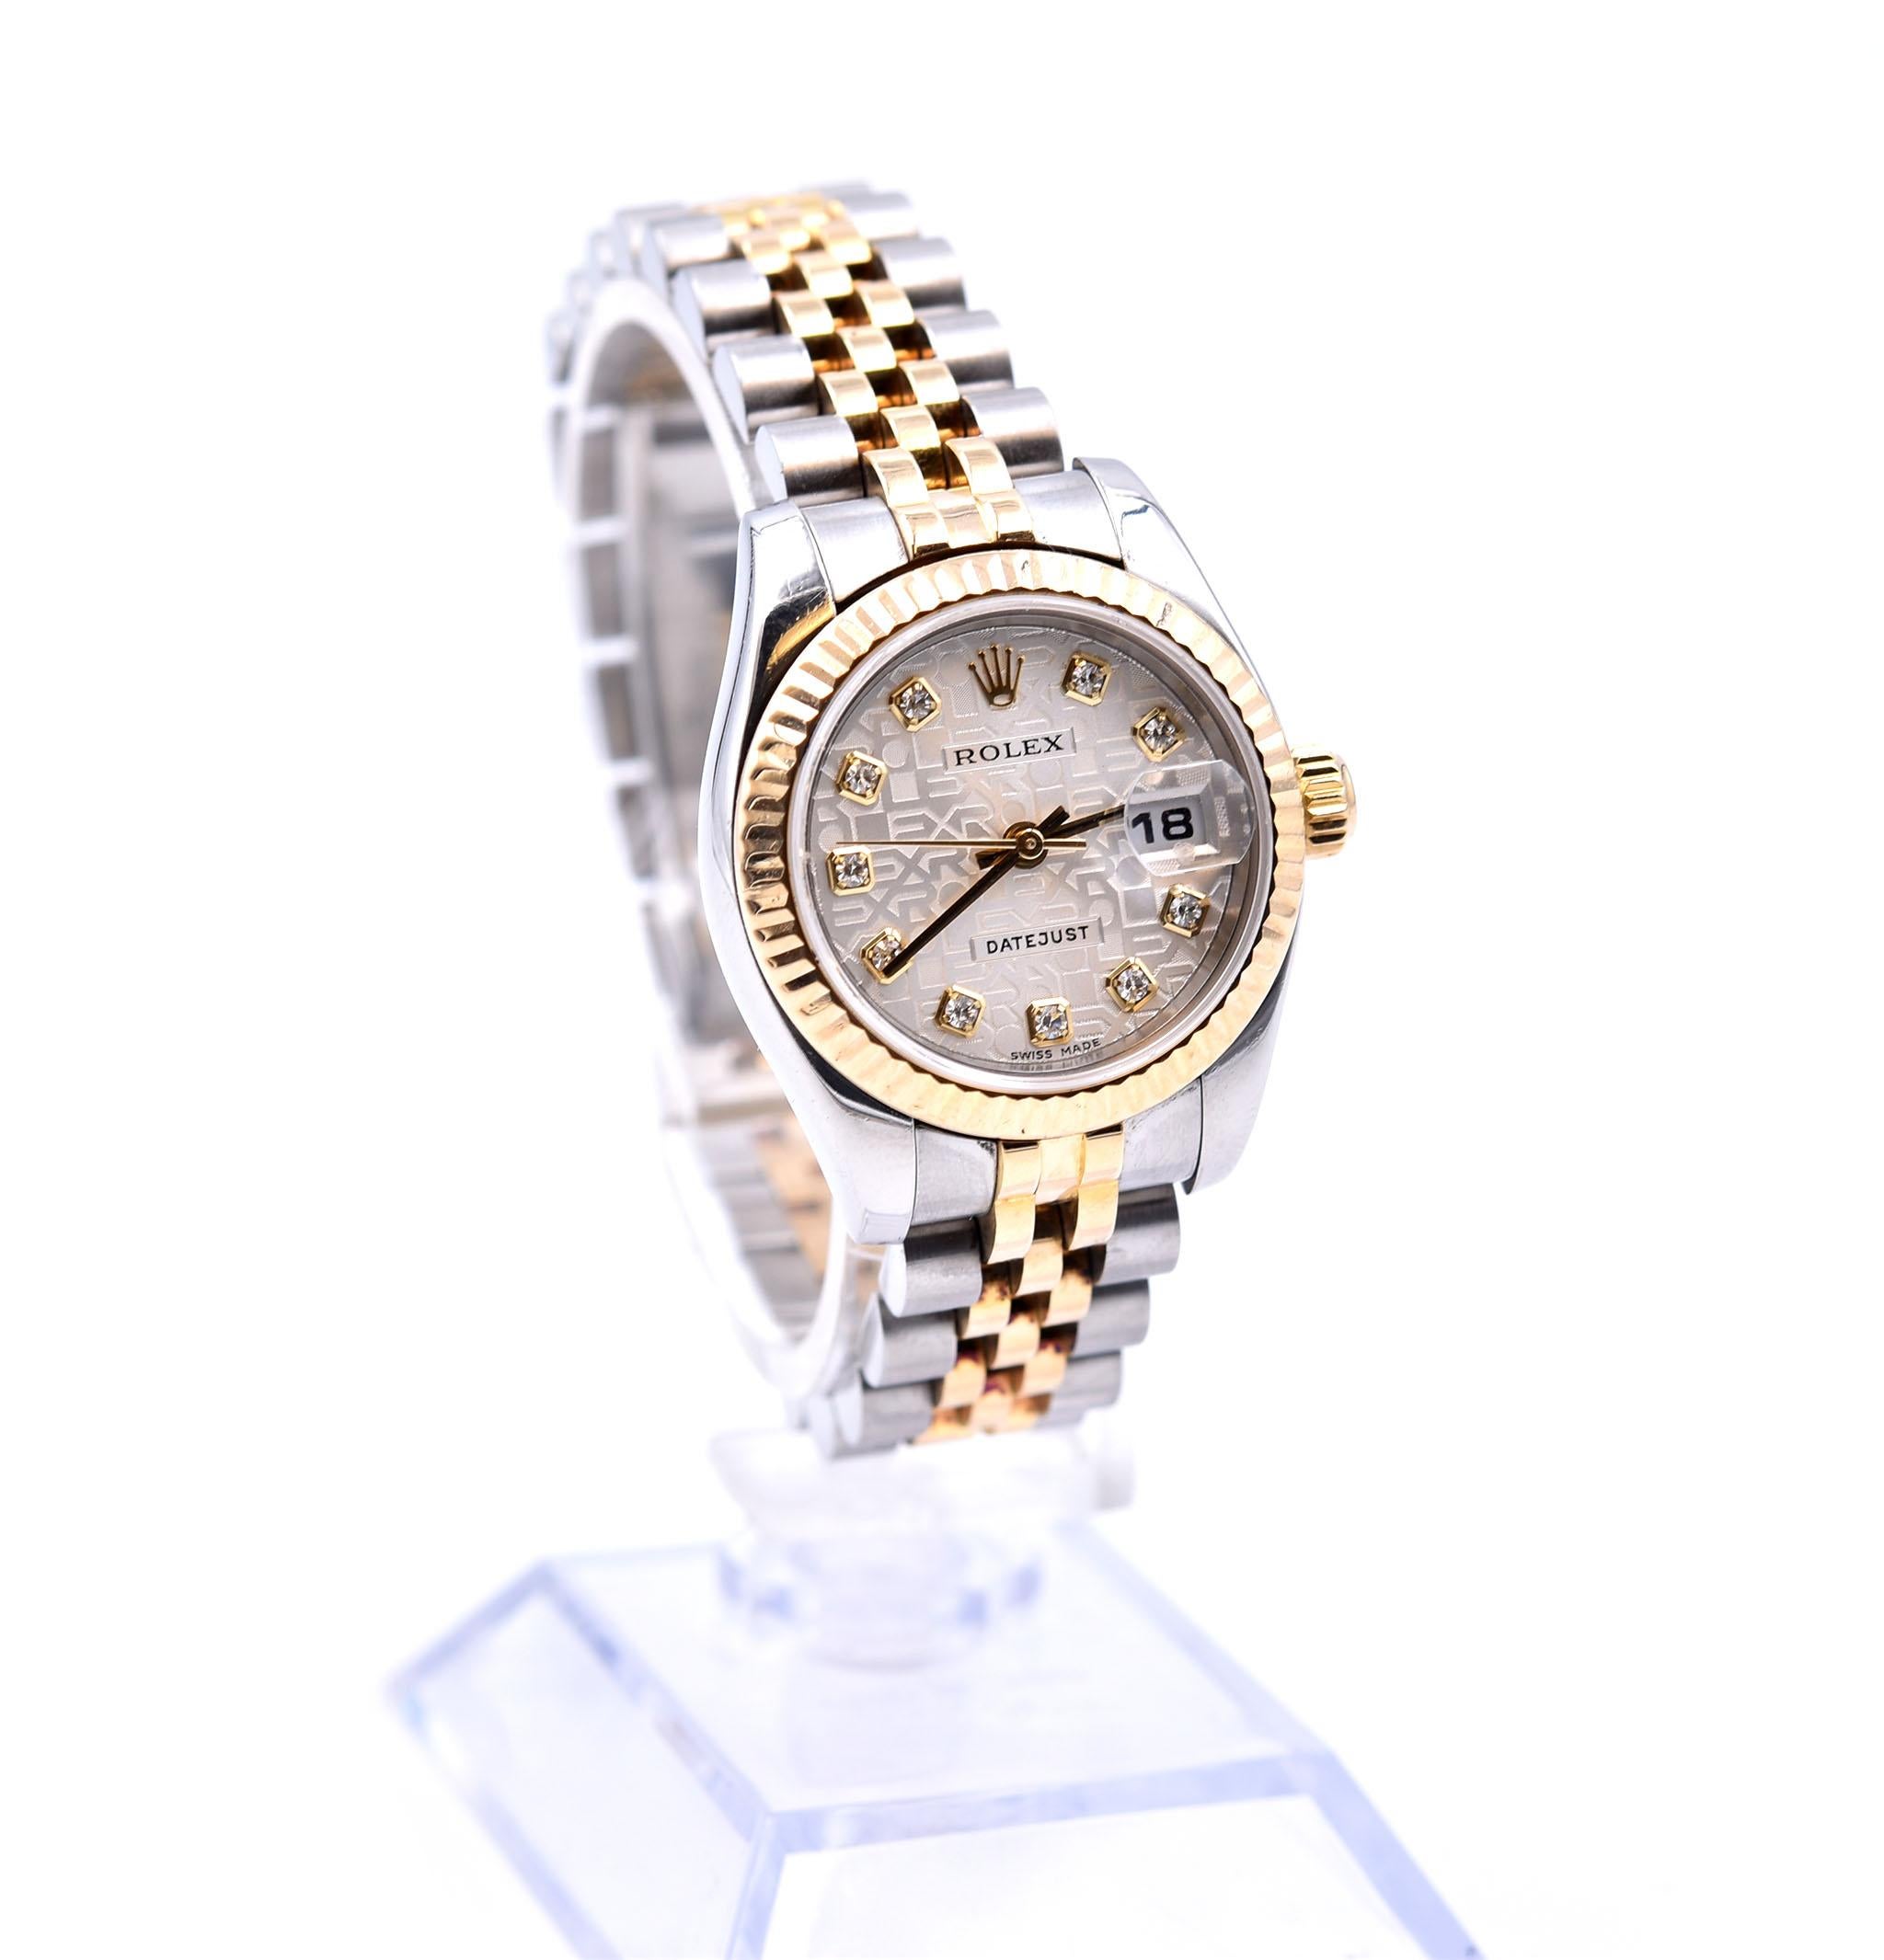 Movement: automatic 
Function: hours, minutes, seconds, date
Case: 26mm stainless steel case with 18k yellow gold fluted bezel, 18k yellow gold screw-down crown, sapphire crystal, water resistant to 100 meters
Band: stainless steel and 18k yellow